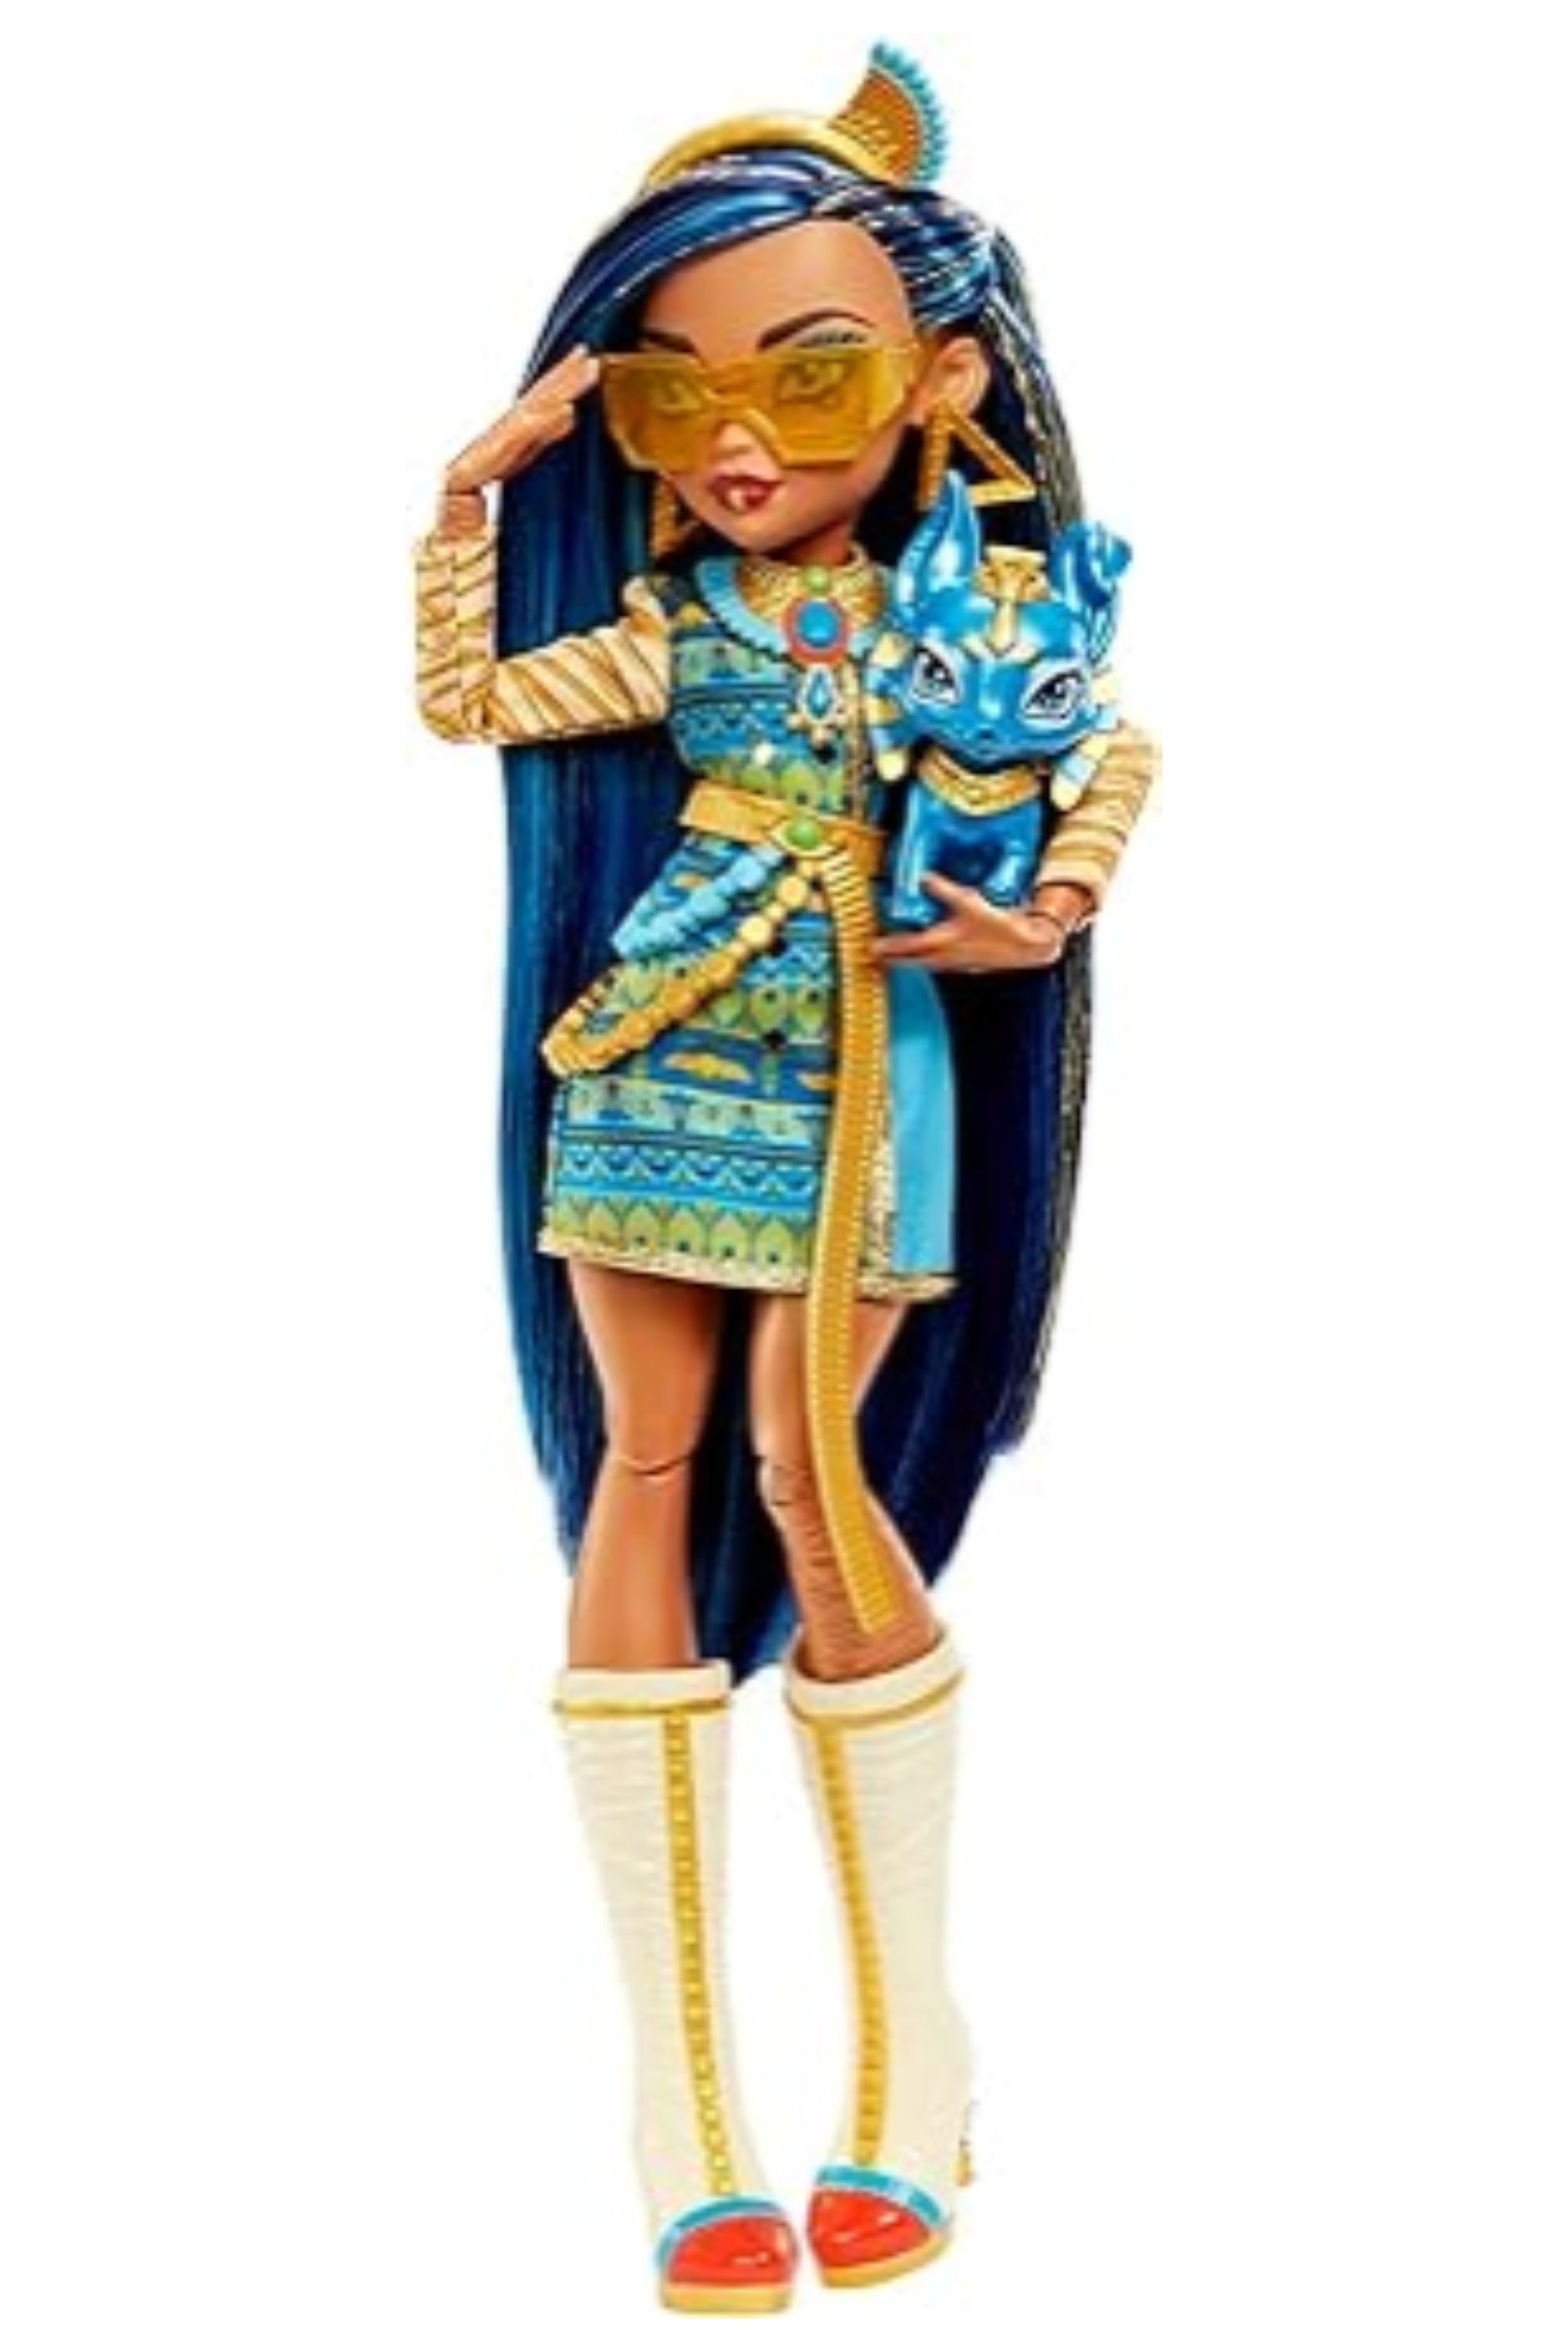 Monster High Cleo De Nile Fashion Doll with Blue Streaked Hair